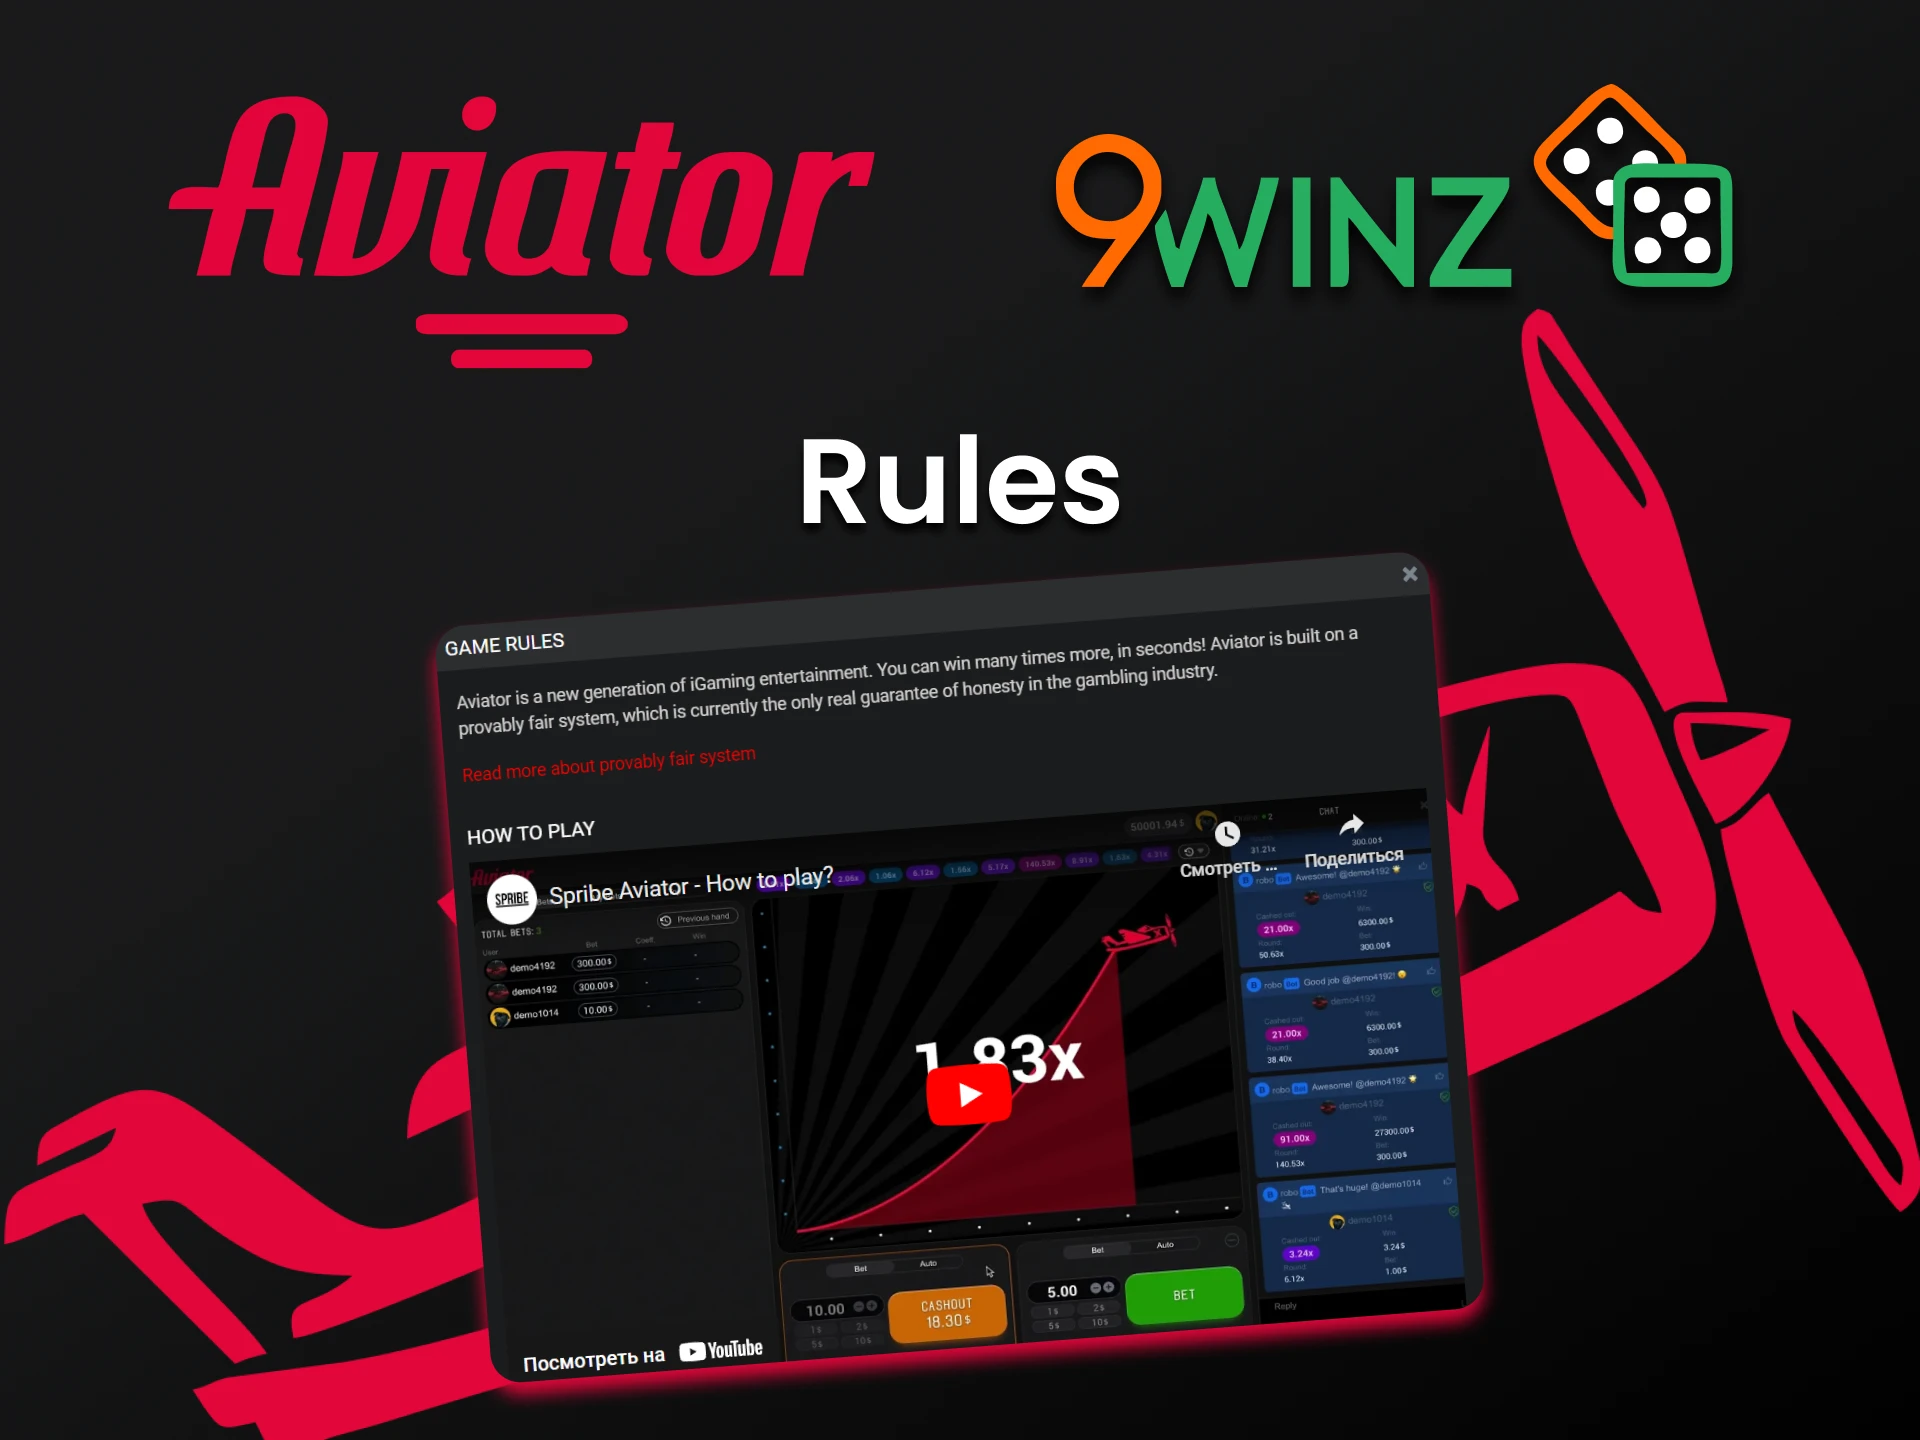 Learn the Aviator rules on 9winz.